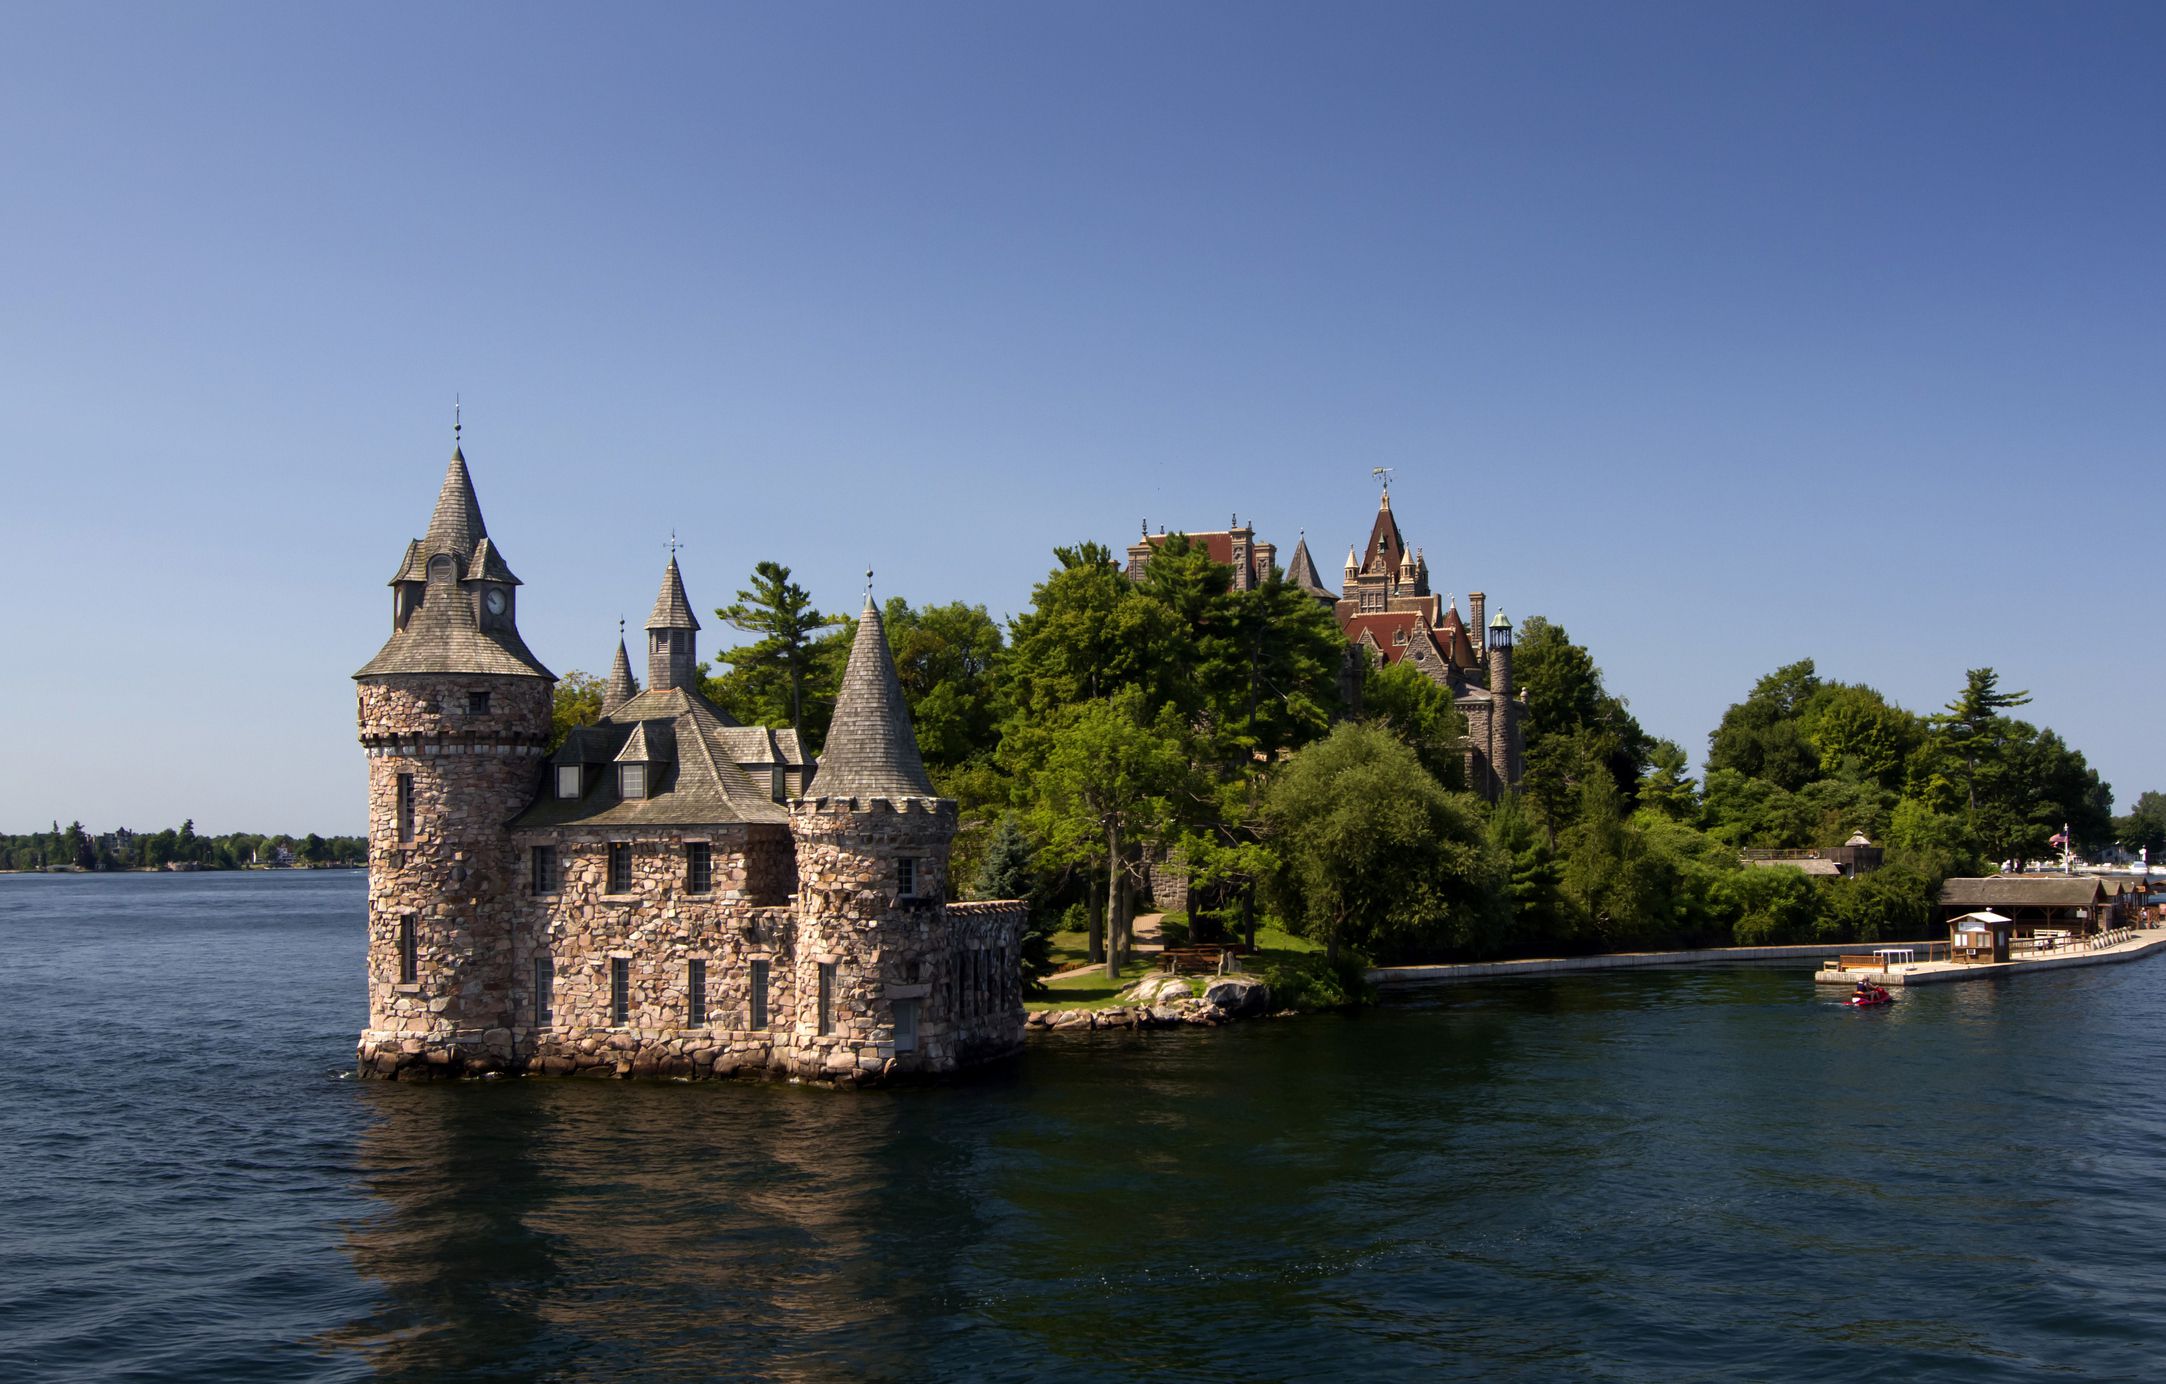 Explore Boldt Castle in the 1000 Islands in New York